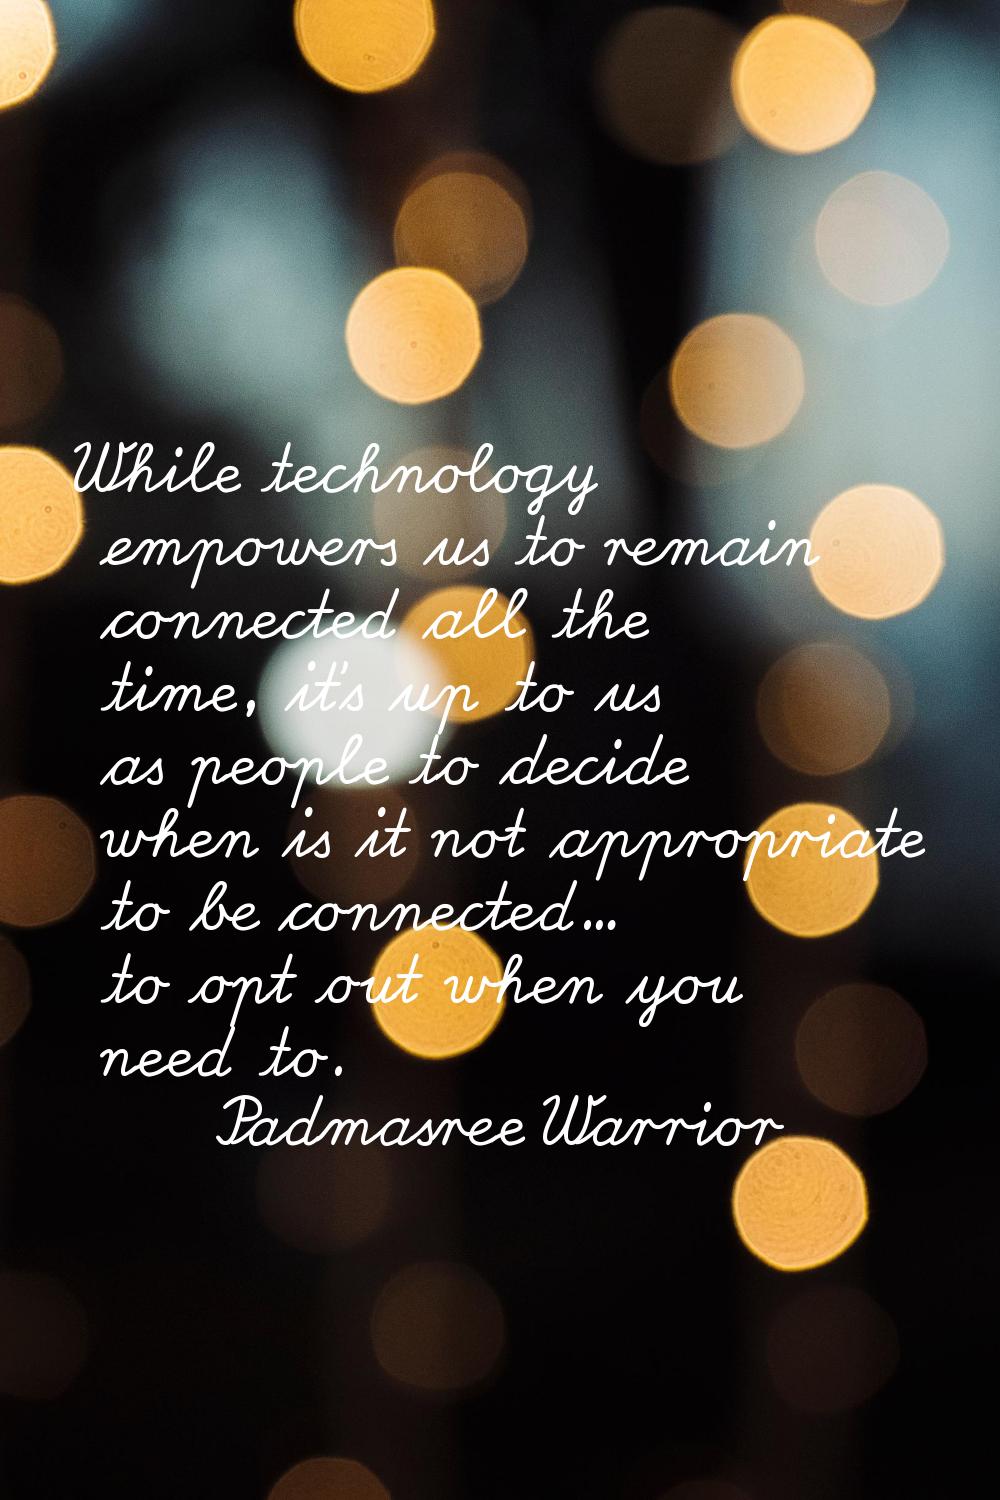 While technology empowers us to remain connected all the time, it's up to us as people to decide wh